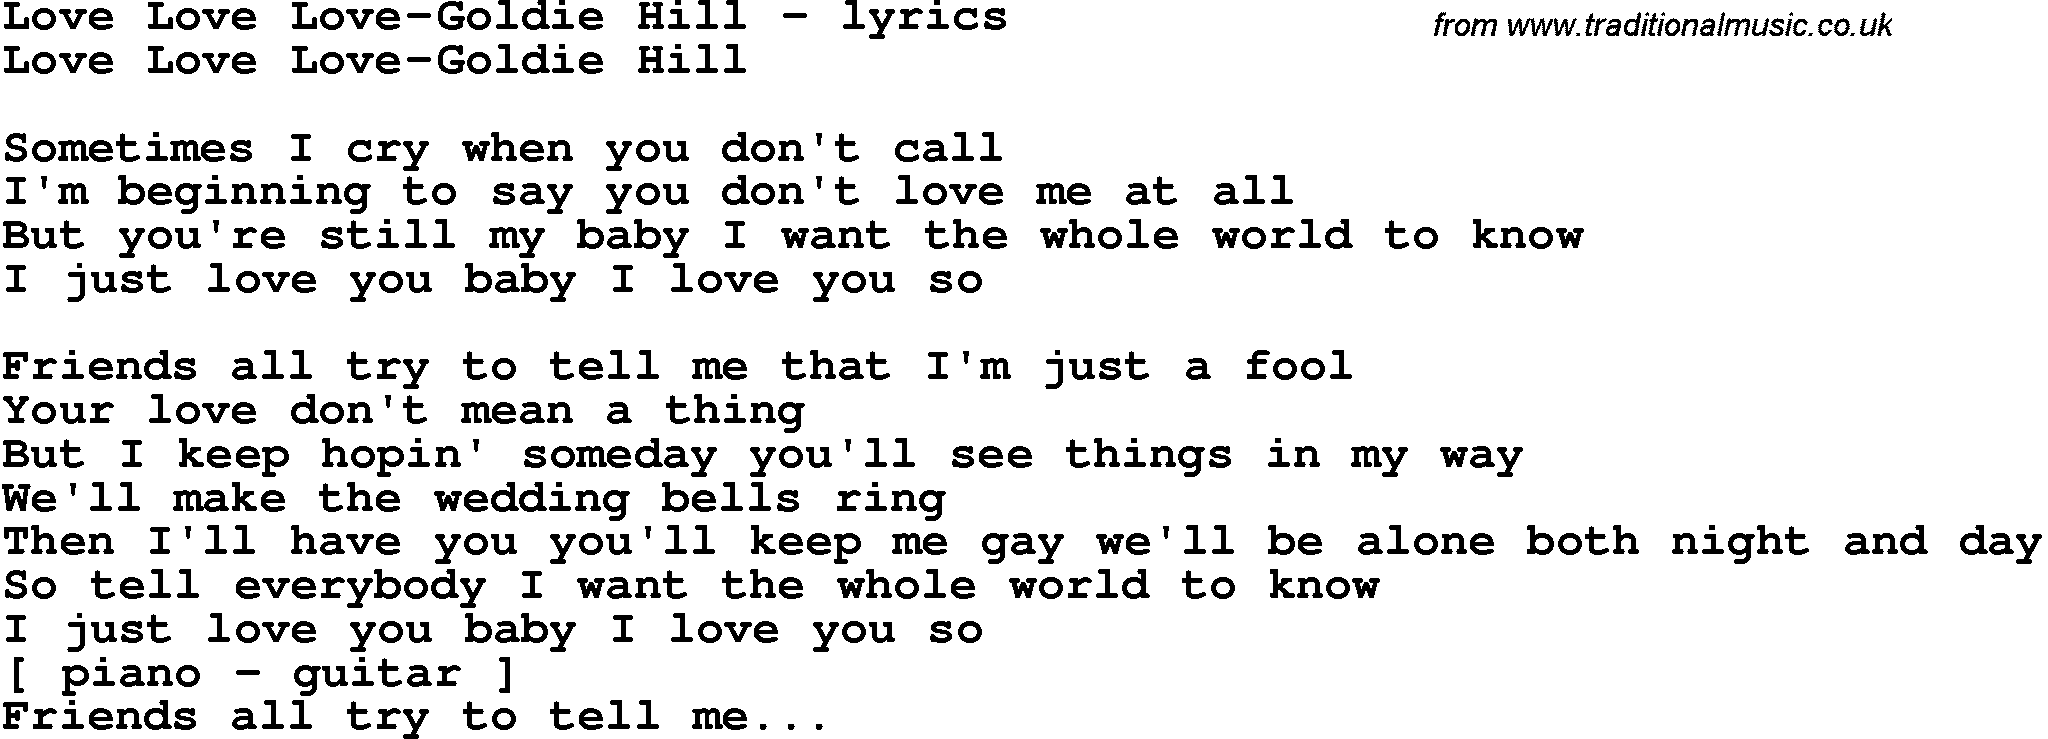 Love Song Lyrics for: Love Love Love-Goldie Hill